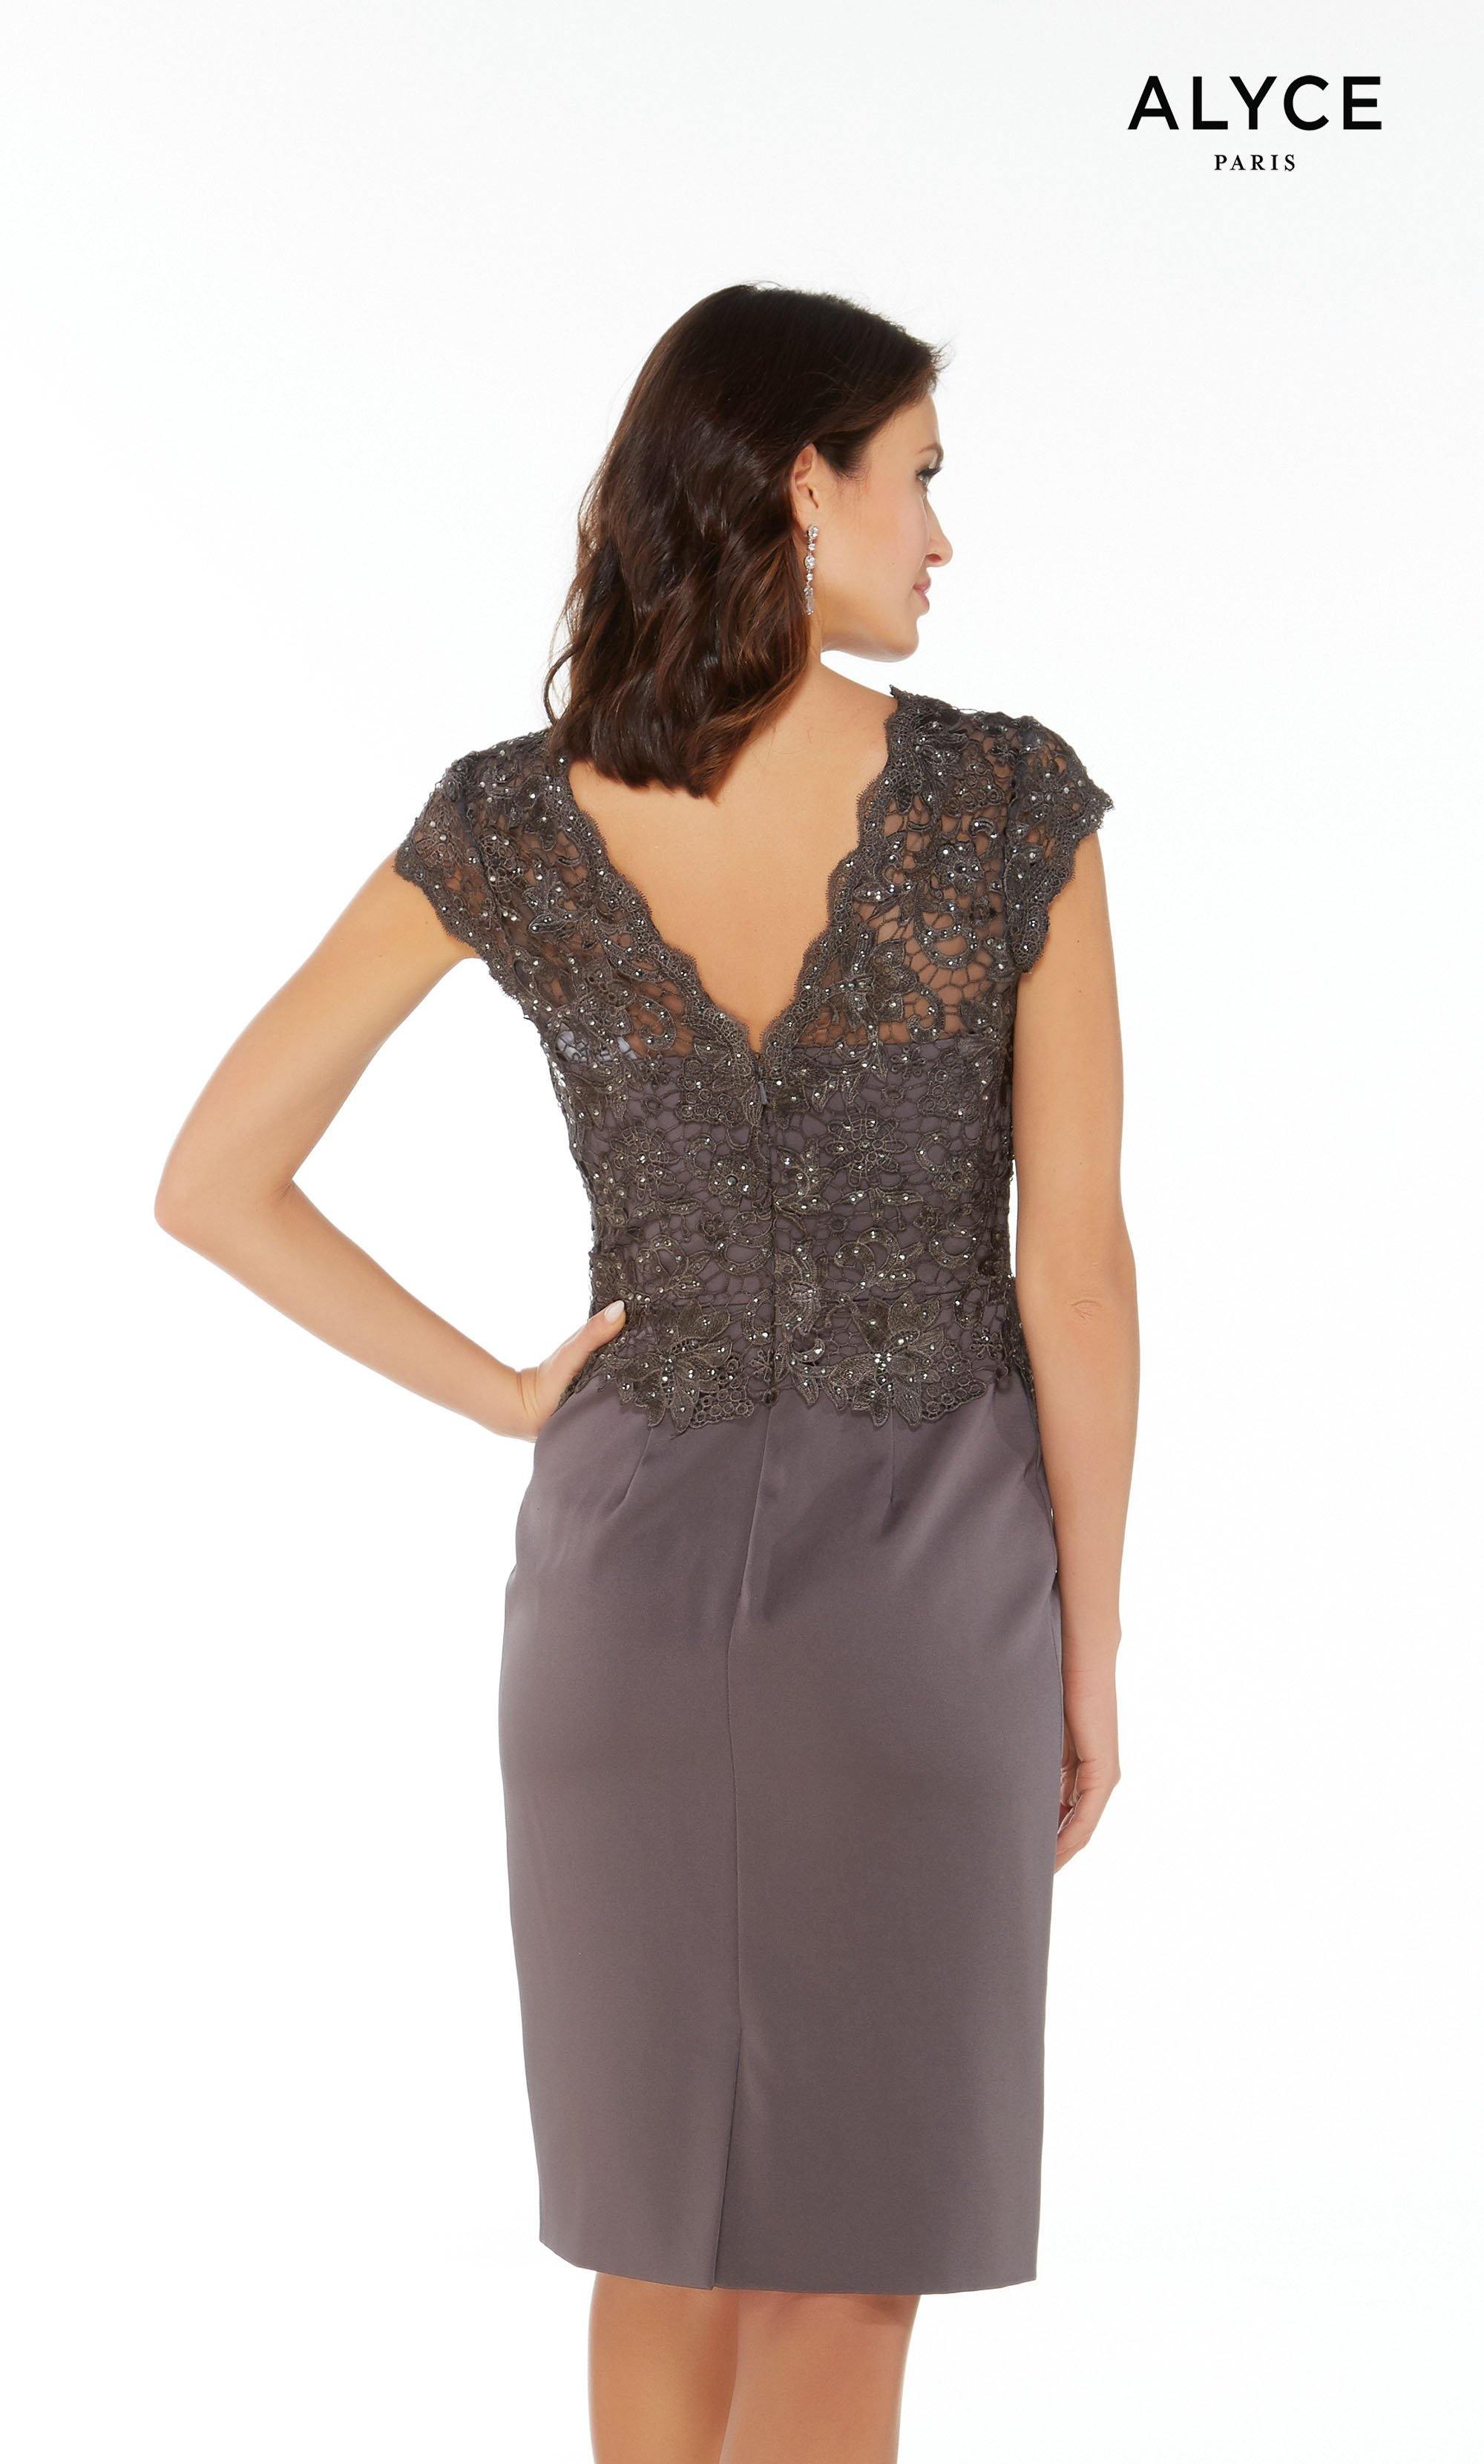 Gunmetal jersey knee length cocktail dress with a V-neck, cap sleeves, and a lace peplum top